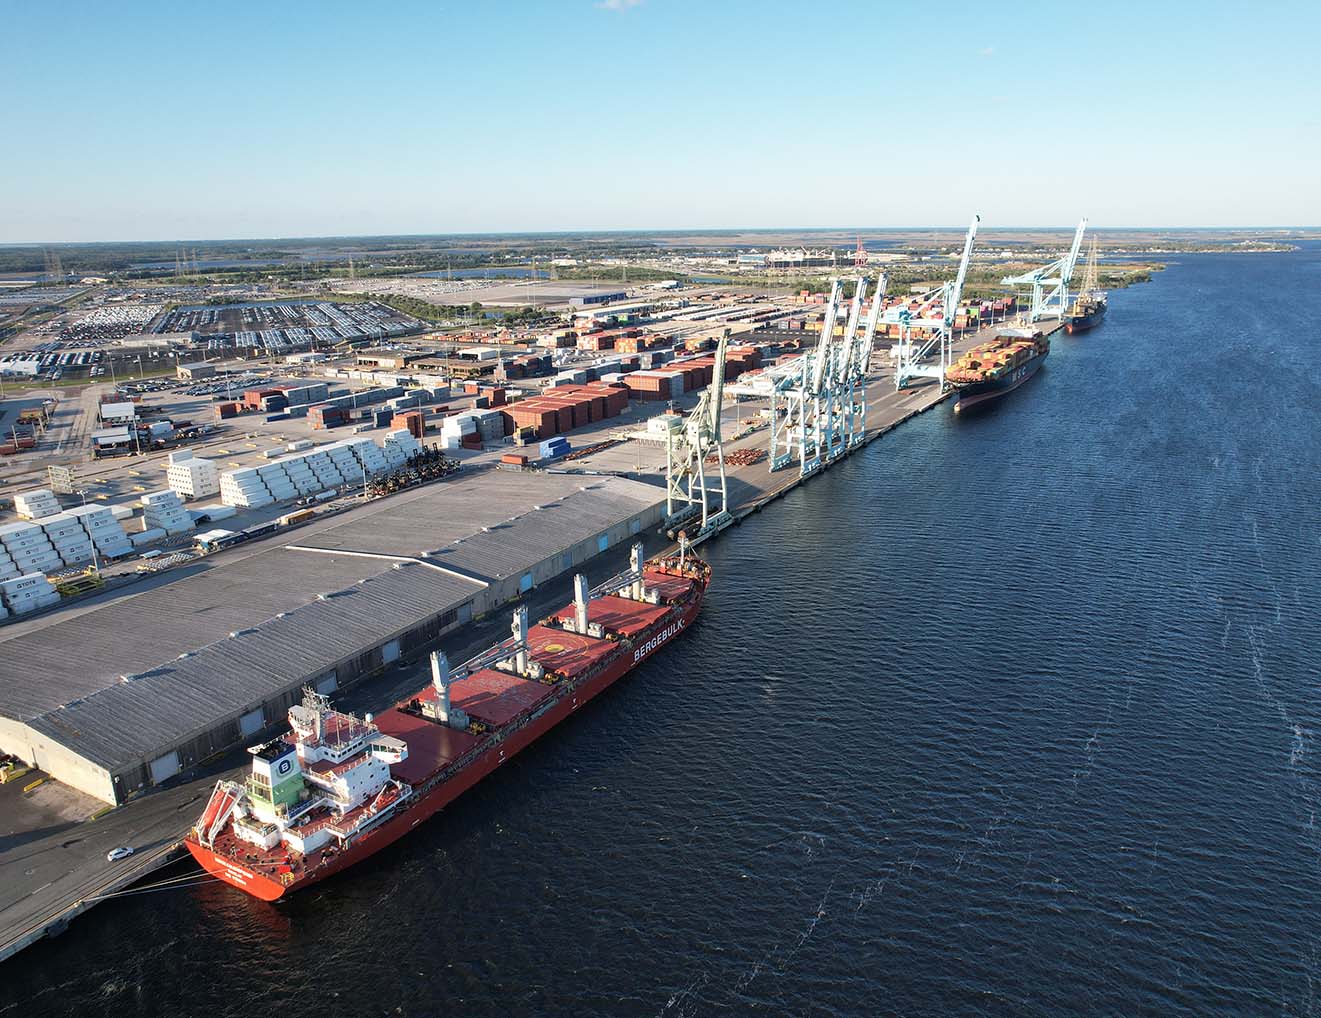 Aerial view from over the port of Jacksonville, Florida